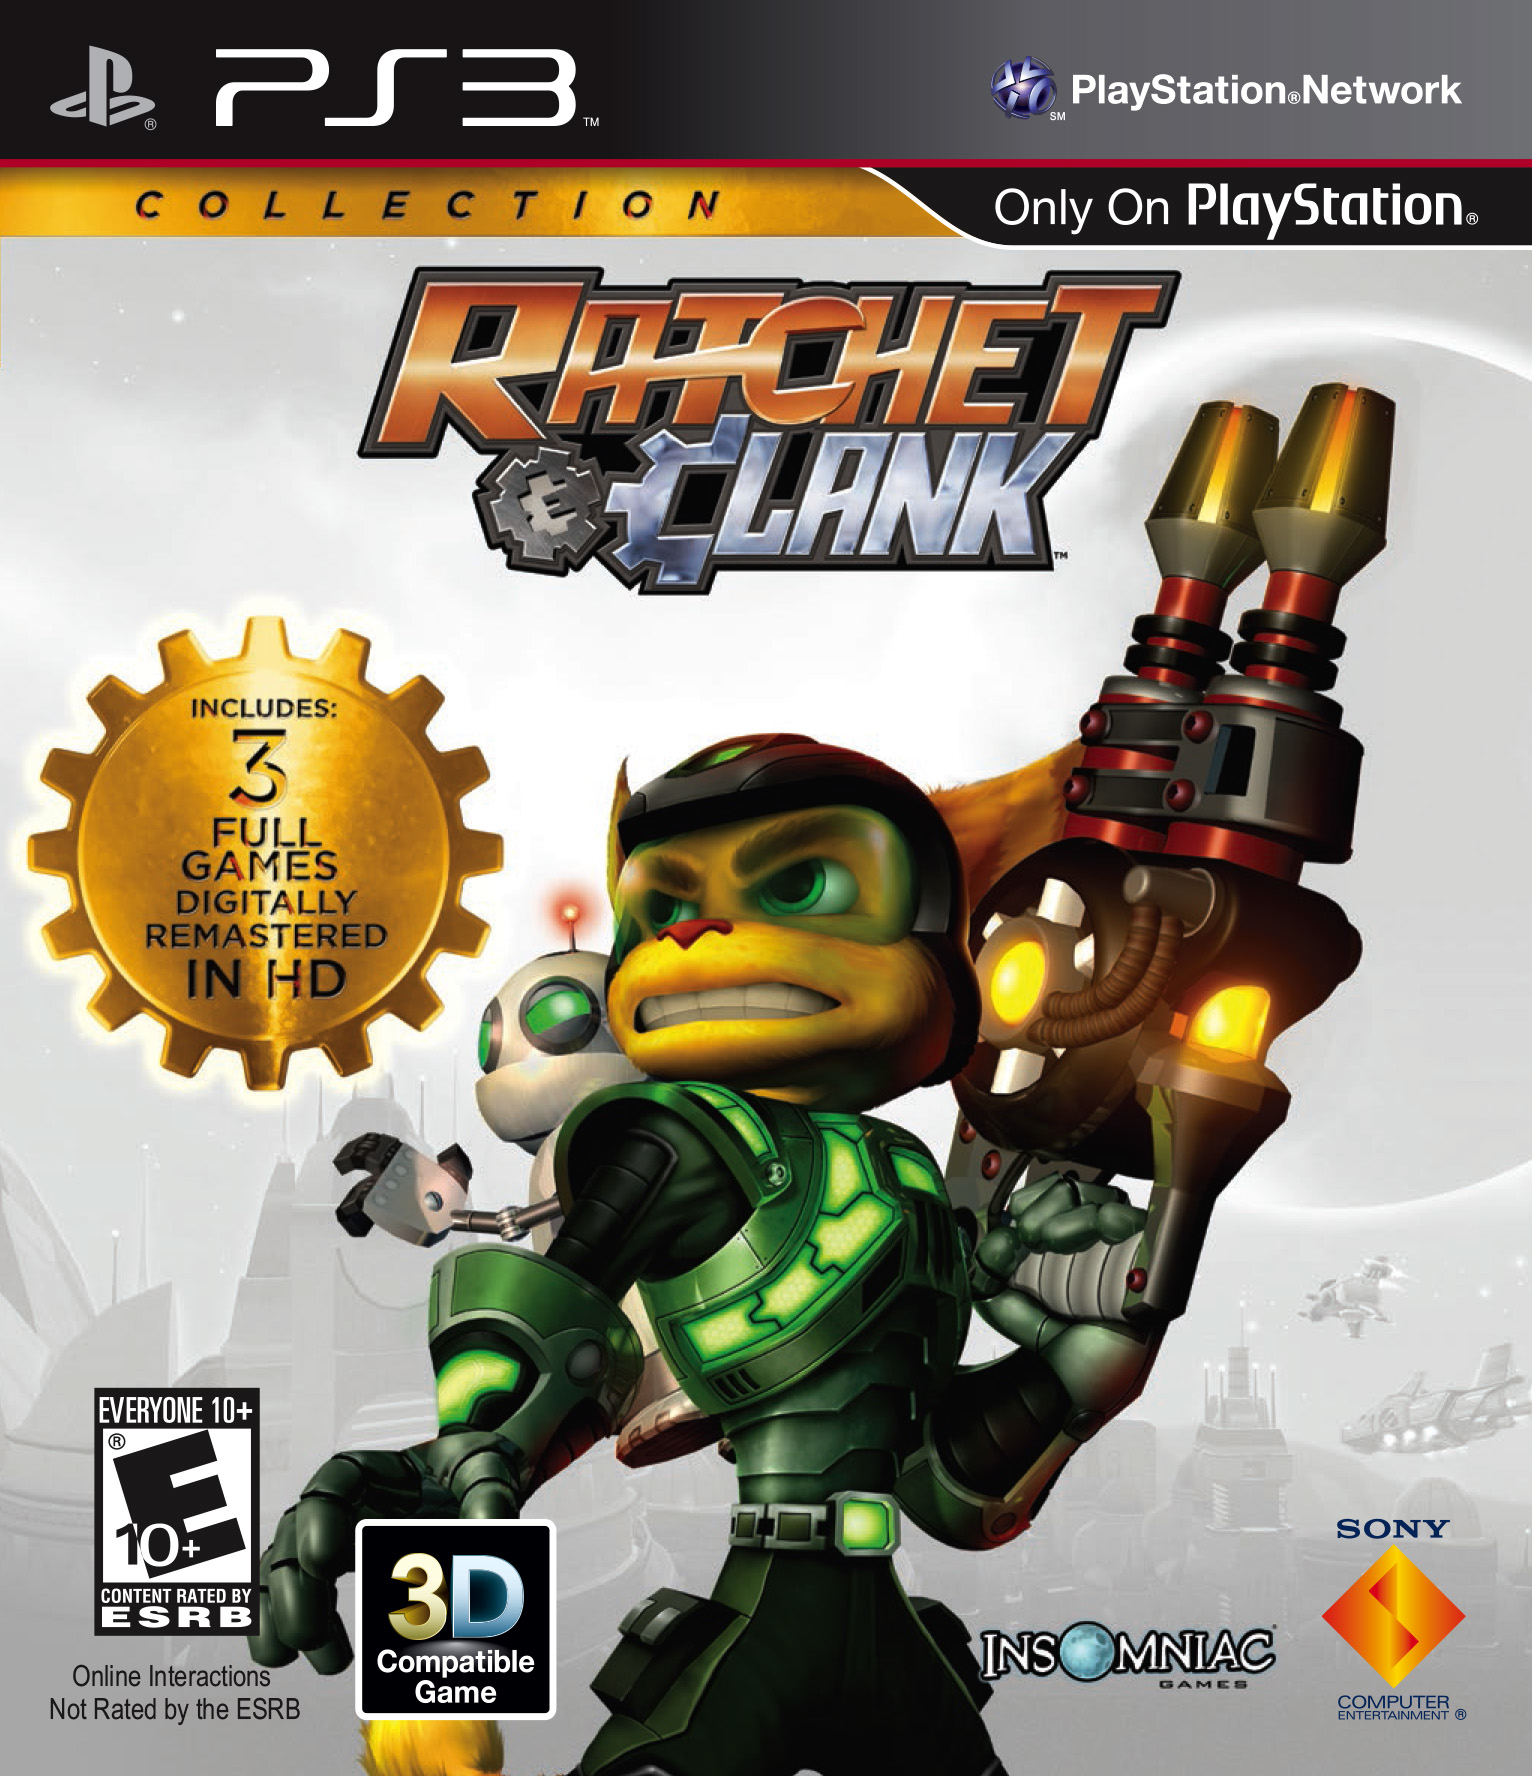 conductor stroke Almost dead Ratchet & Clank Collection | Ratchet & Clank Wiki | Fandom